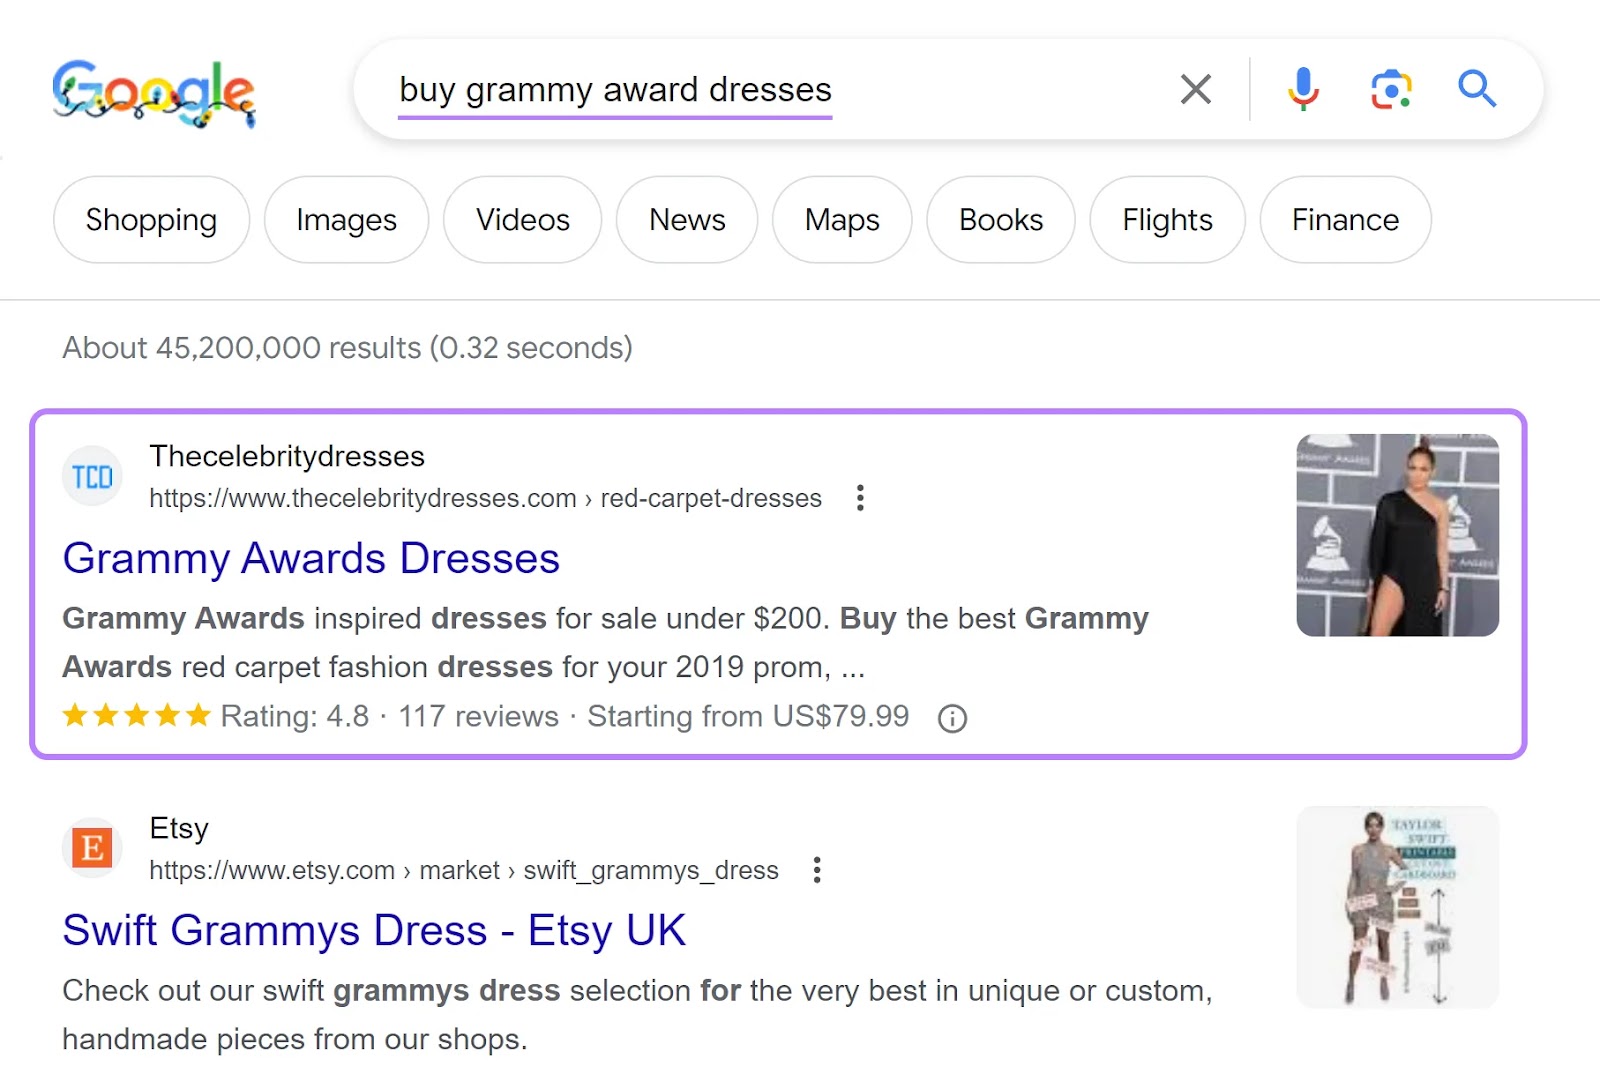 TheCelebrityDresses.com" ranks archetypal  connected  Google SERP for “buy grammy awards dresses"